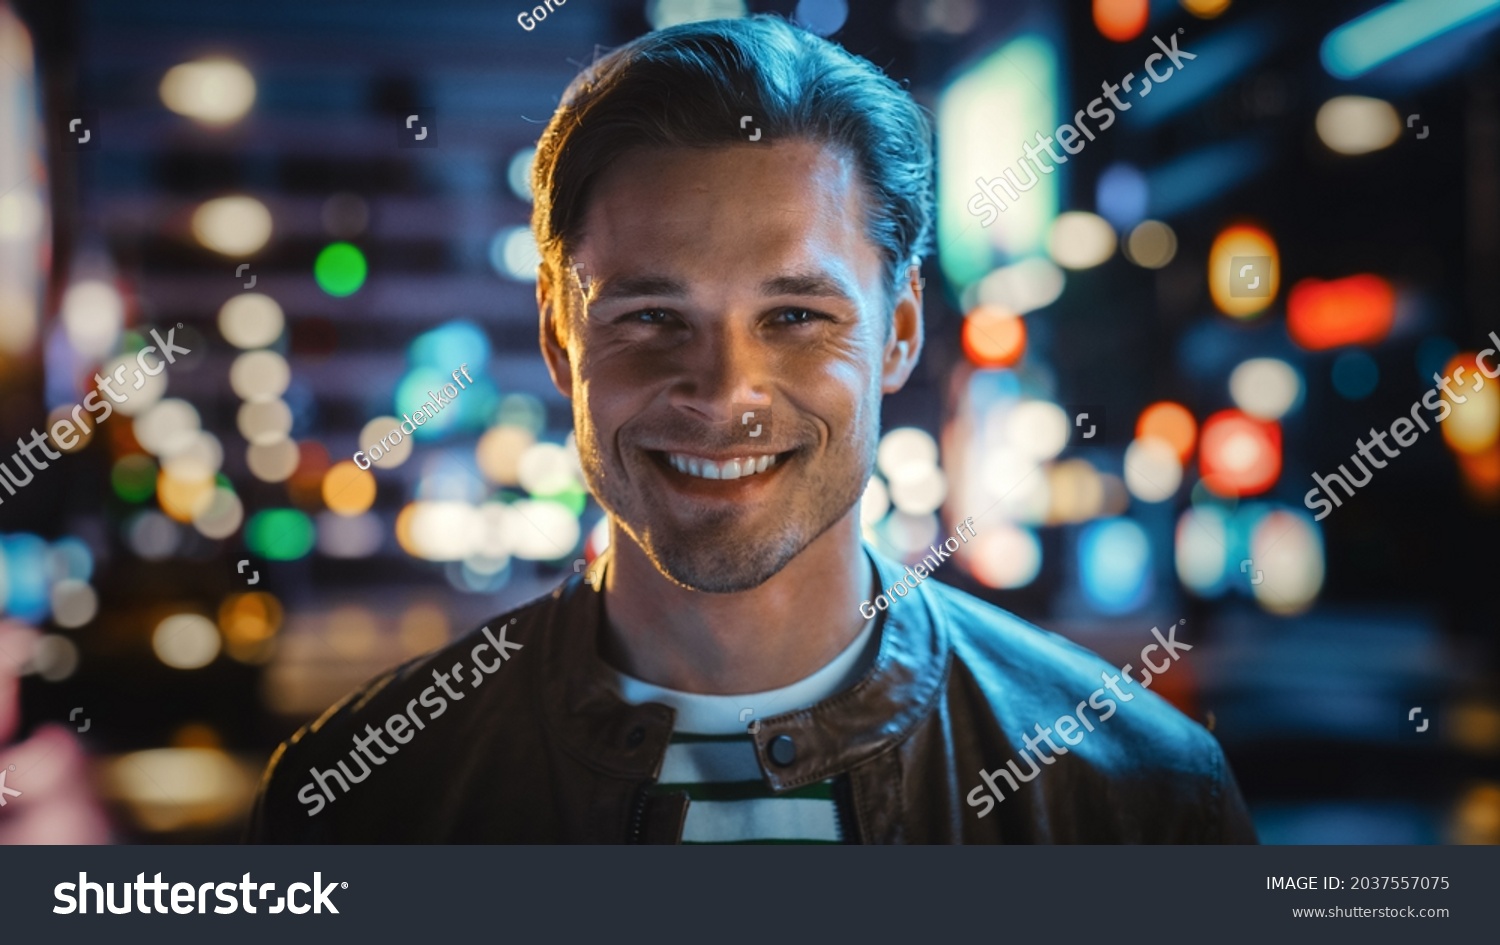 Portrait of Handsome Blonde Man Smiling, Looking at Camera, Standing in Night City with Bokeh Neon Street Lights in Background. Happy Confident Young Man with Stylish Hair. Close-up Portrait #2037557075